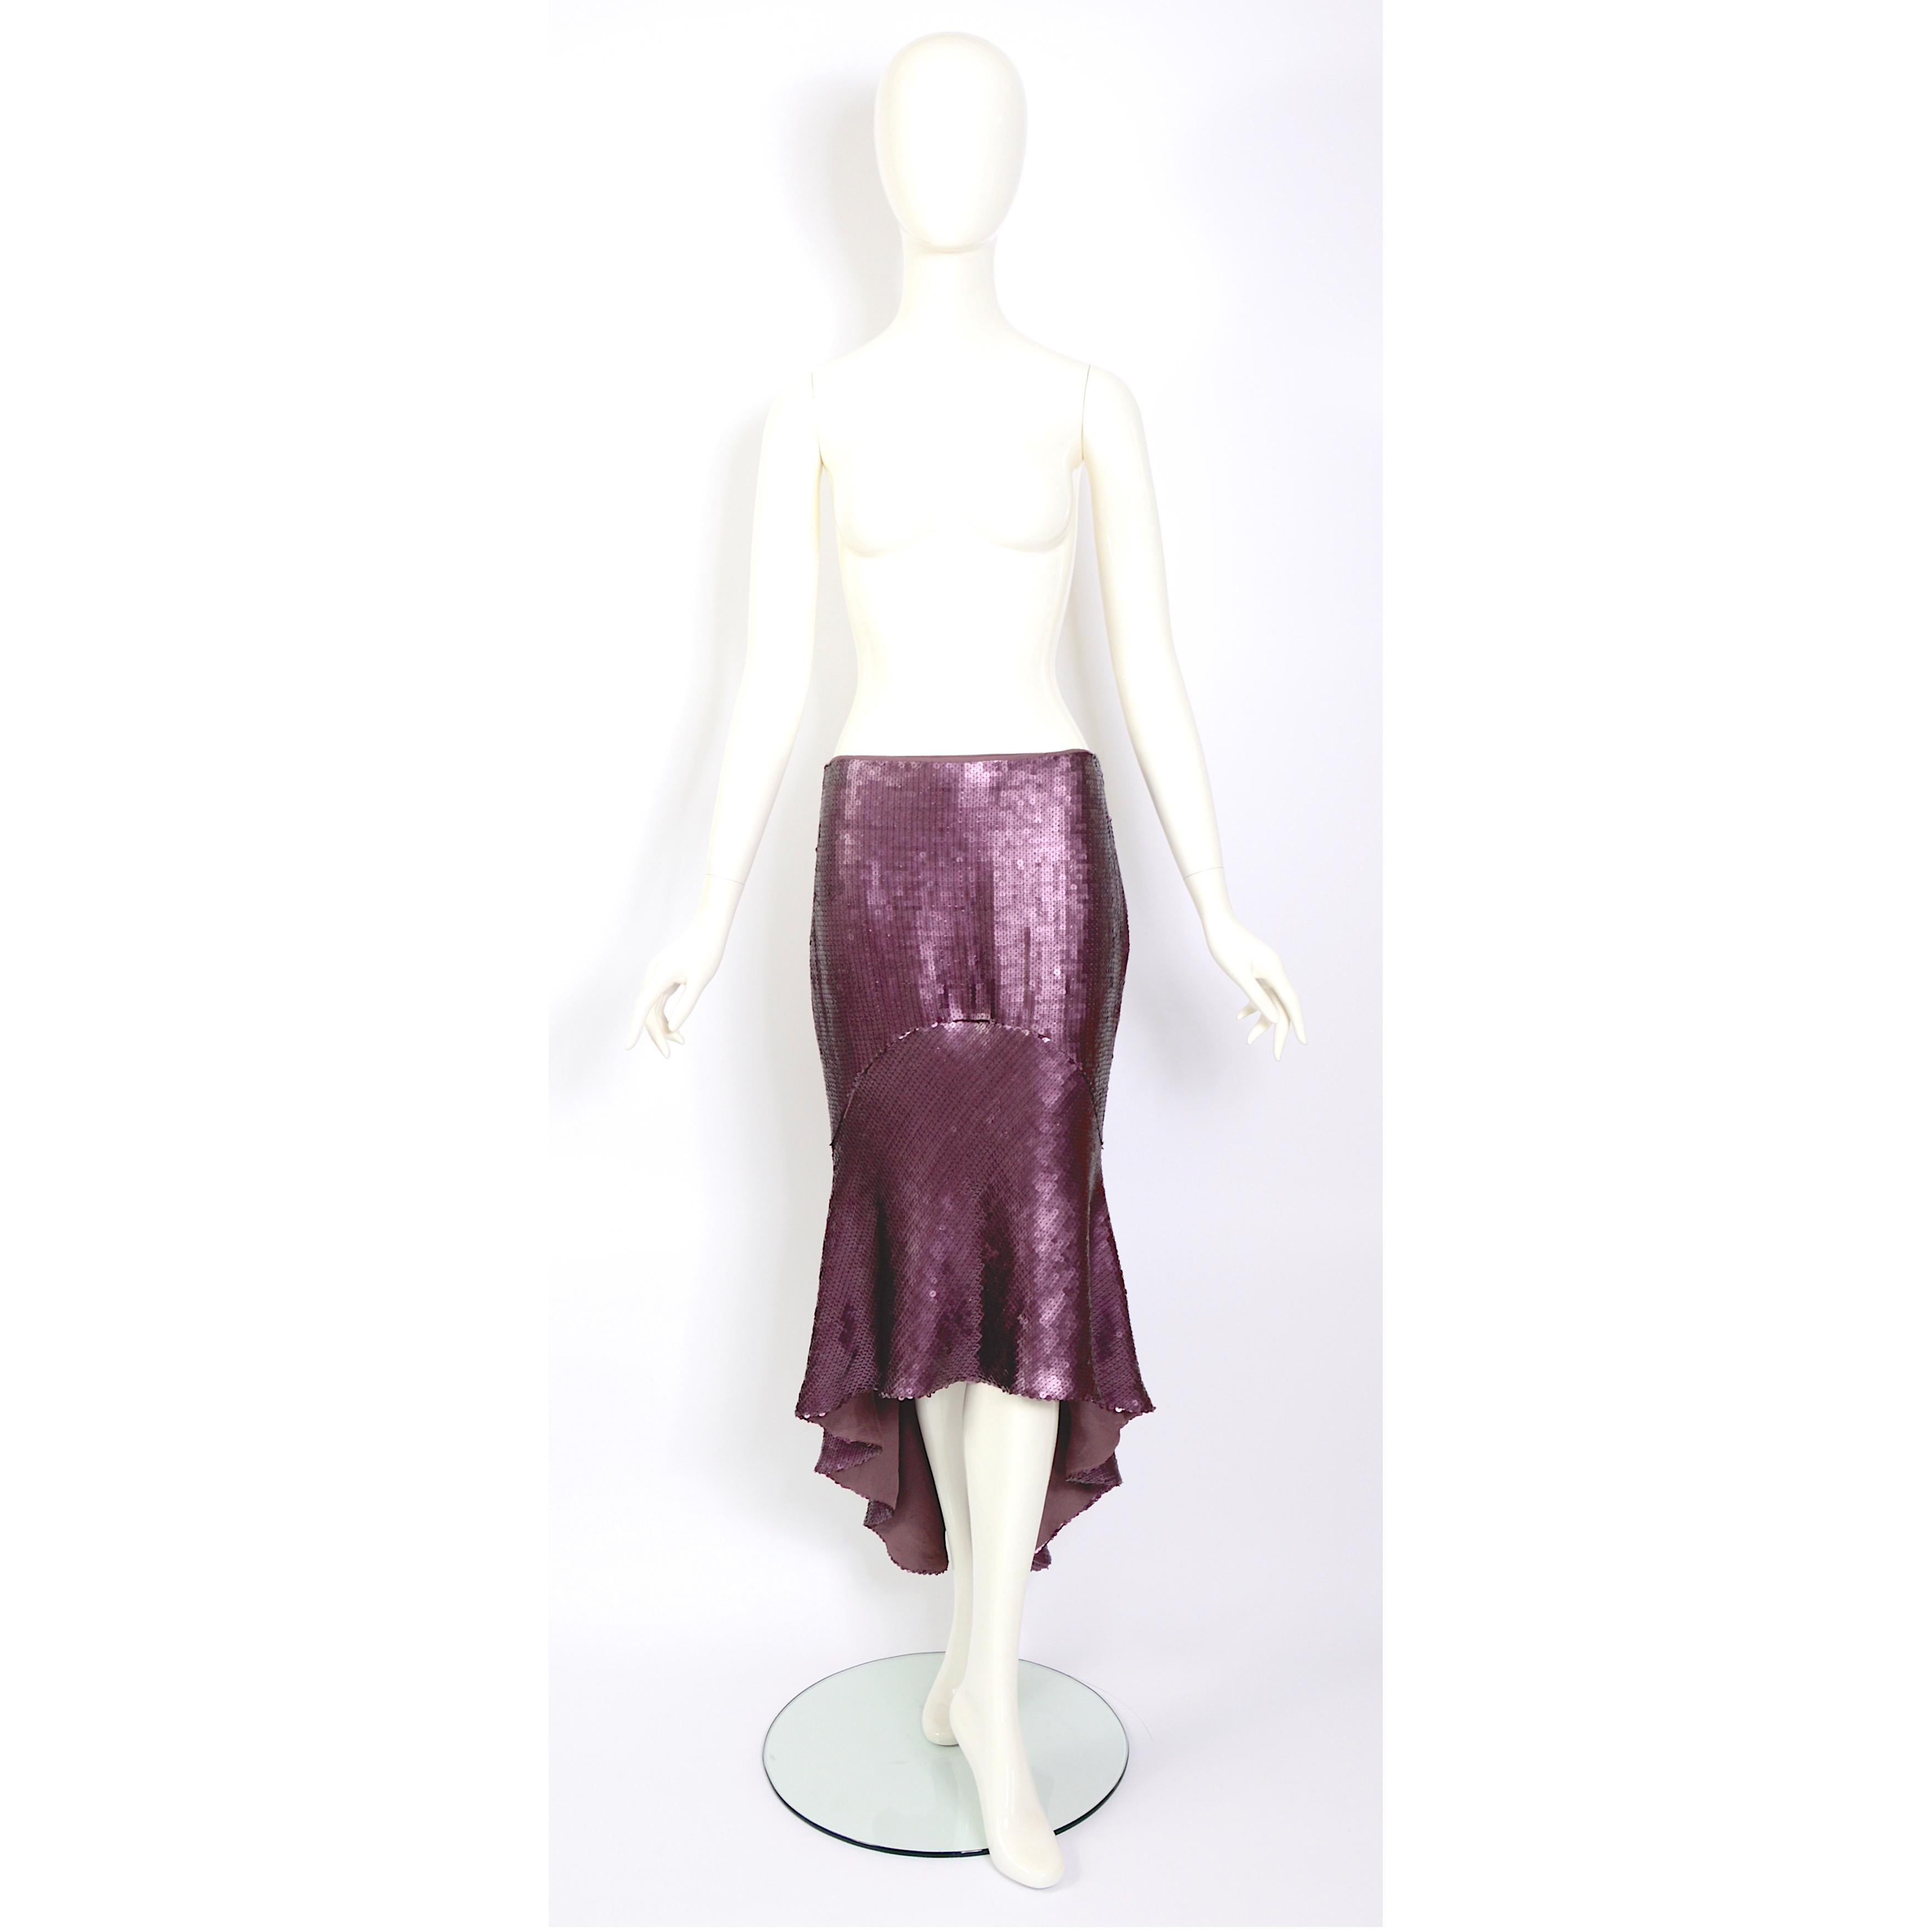 Chloé by Stella McCartney runway 1999 vintage sequin fishtail style skirt  In Excellent Condition For Sale In Antwerp, BE